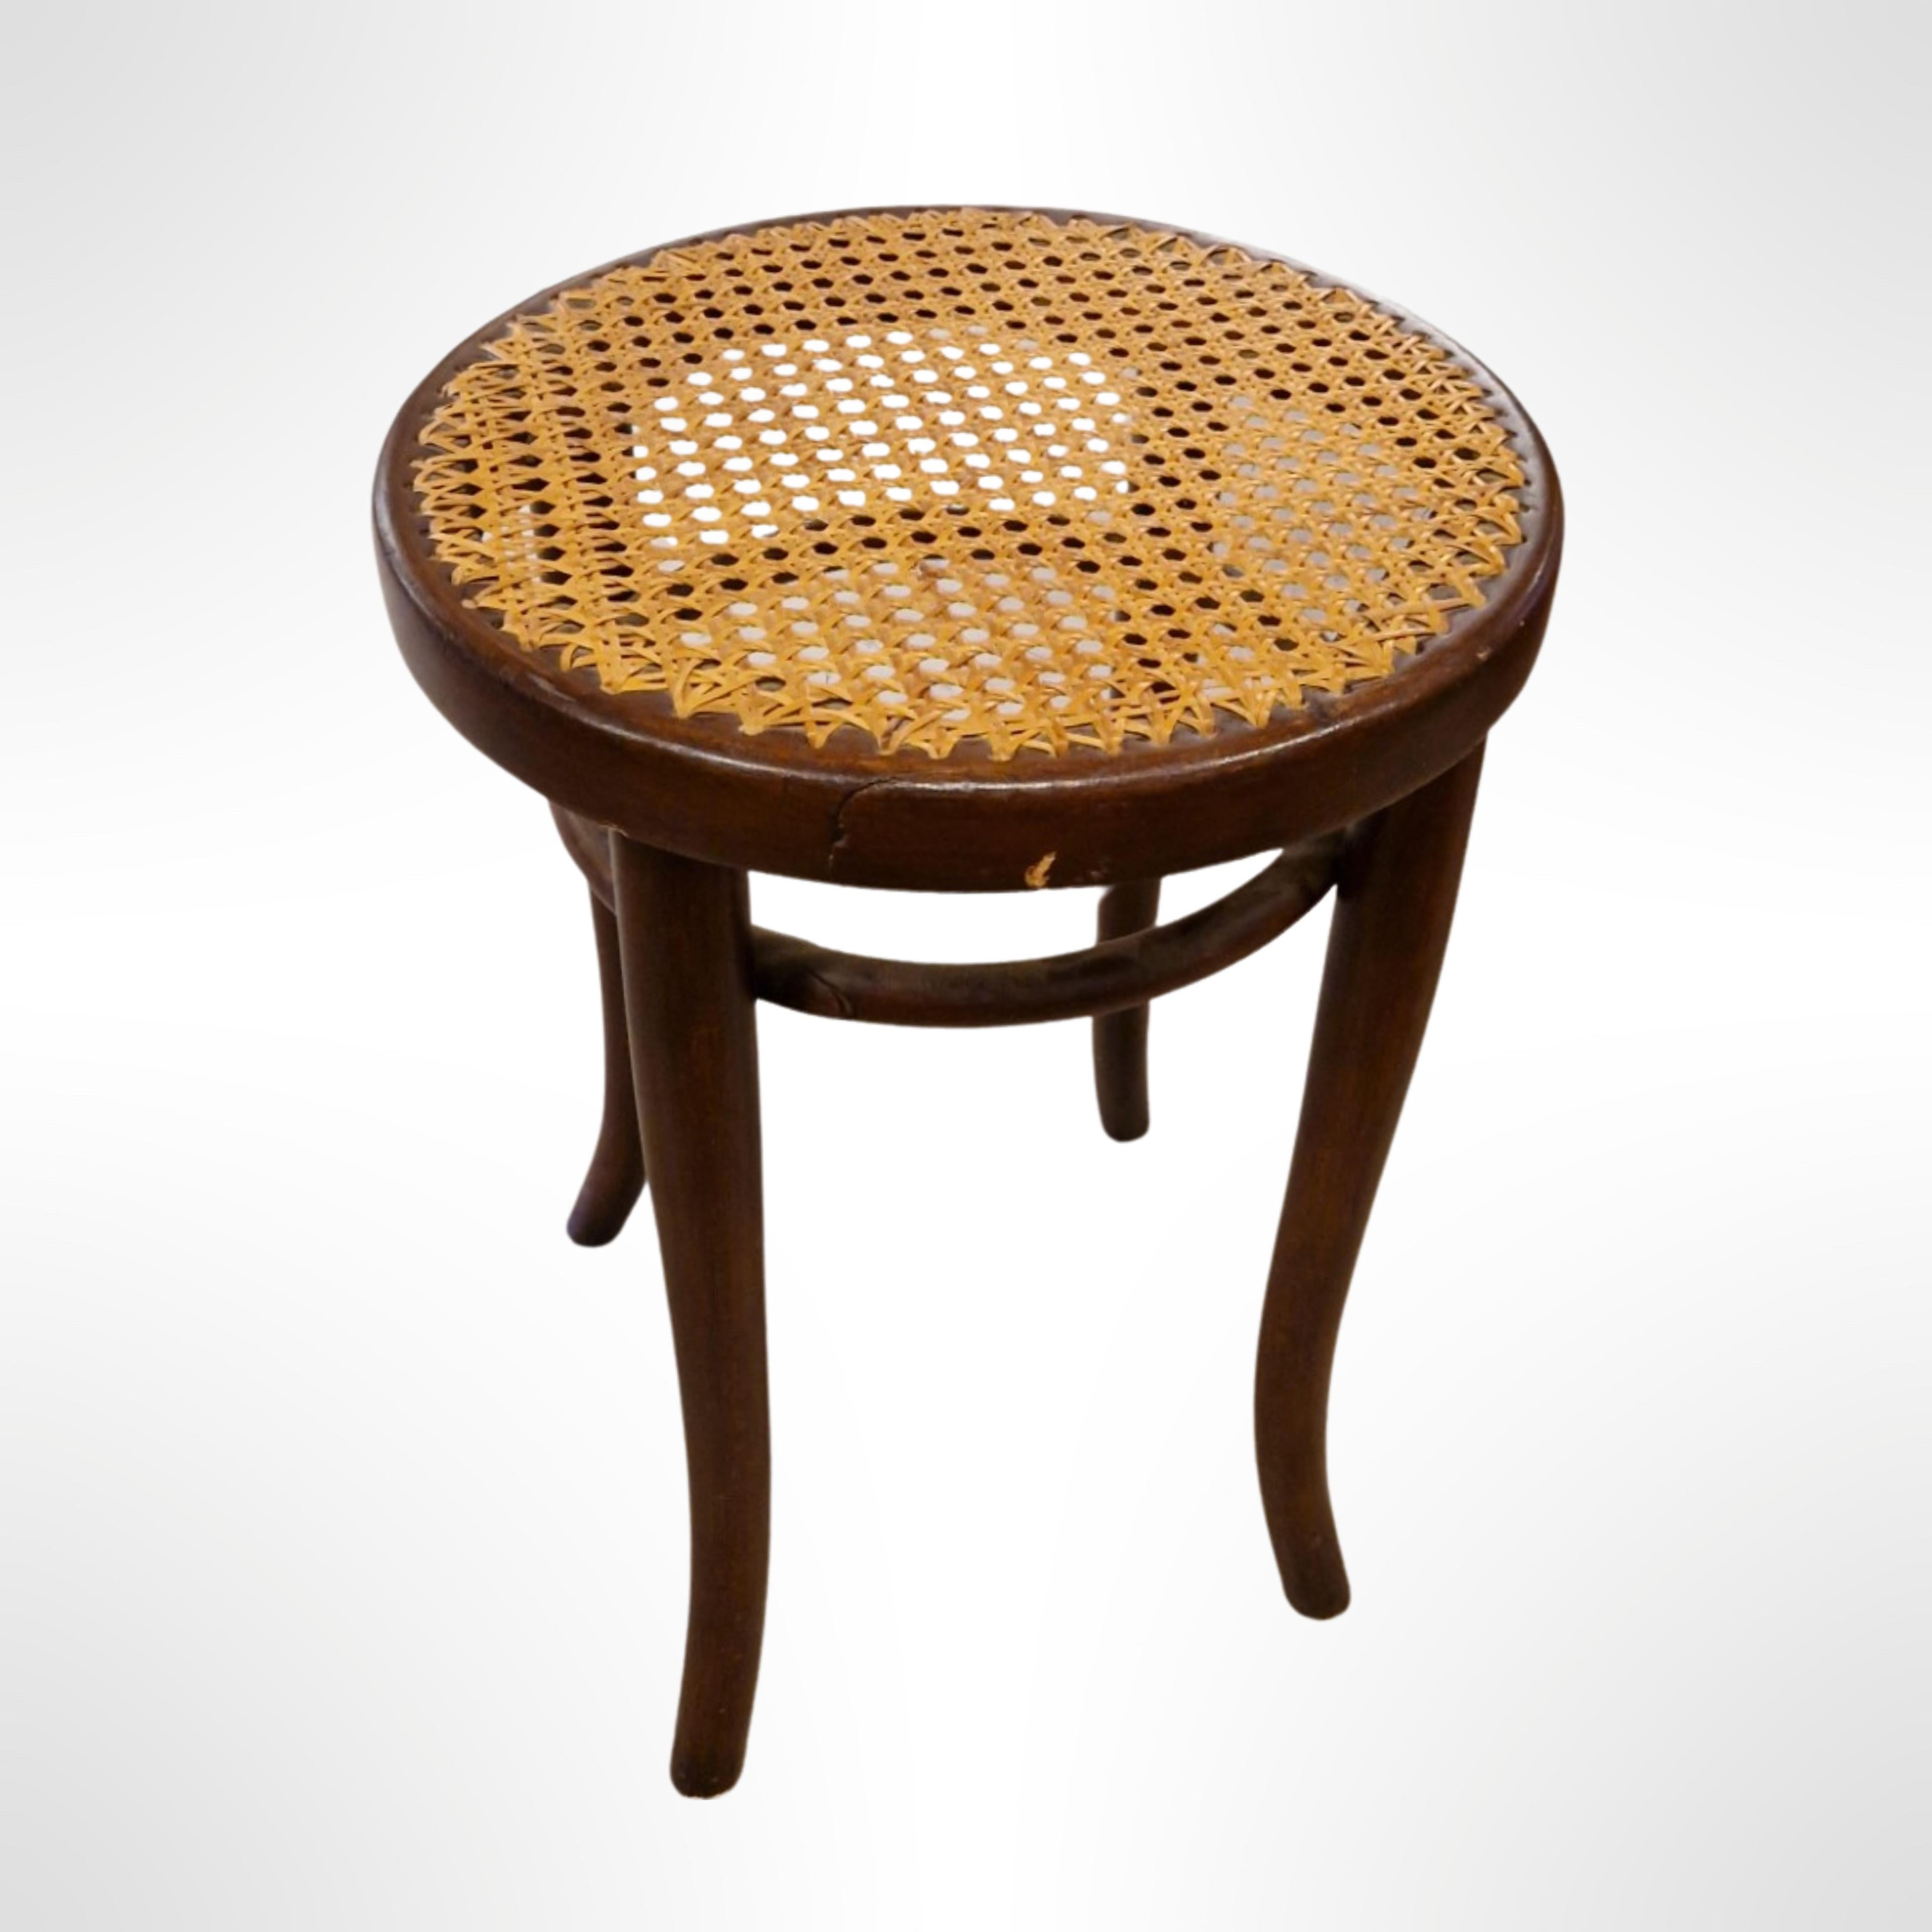 20th Century Low bentwood stool with cane seat by Thonet, Austria 1920s For Sale